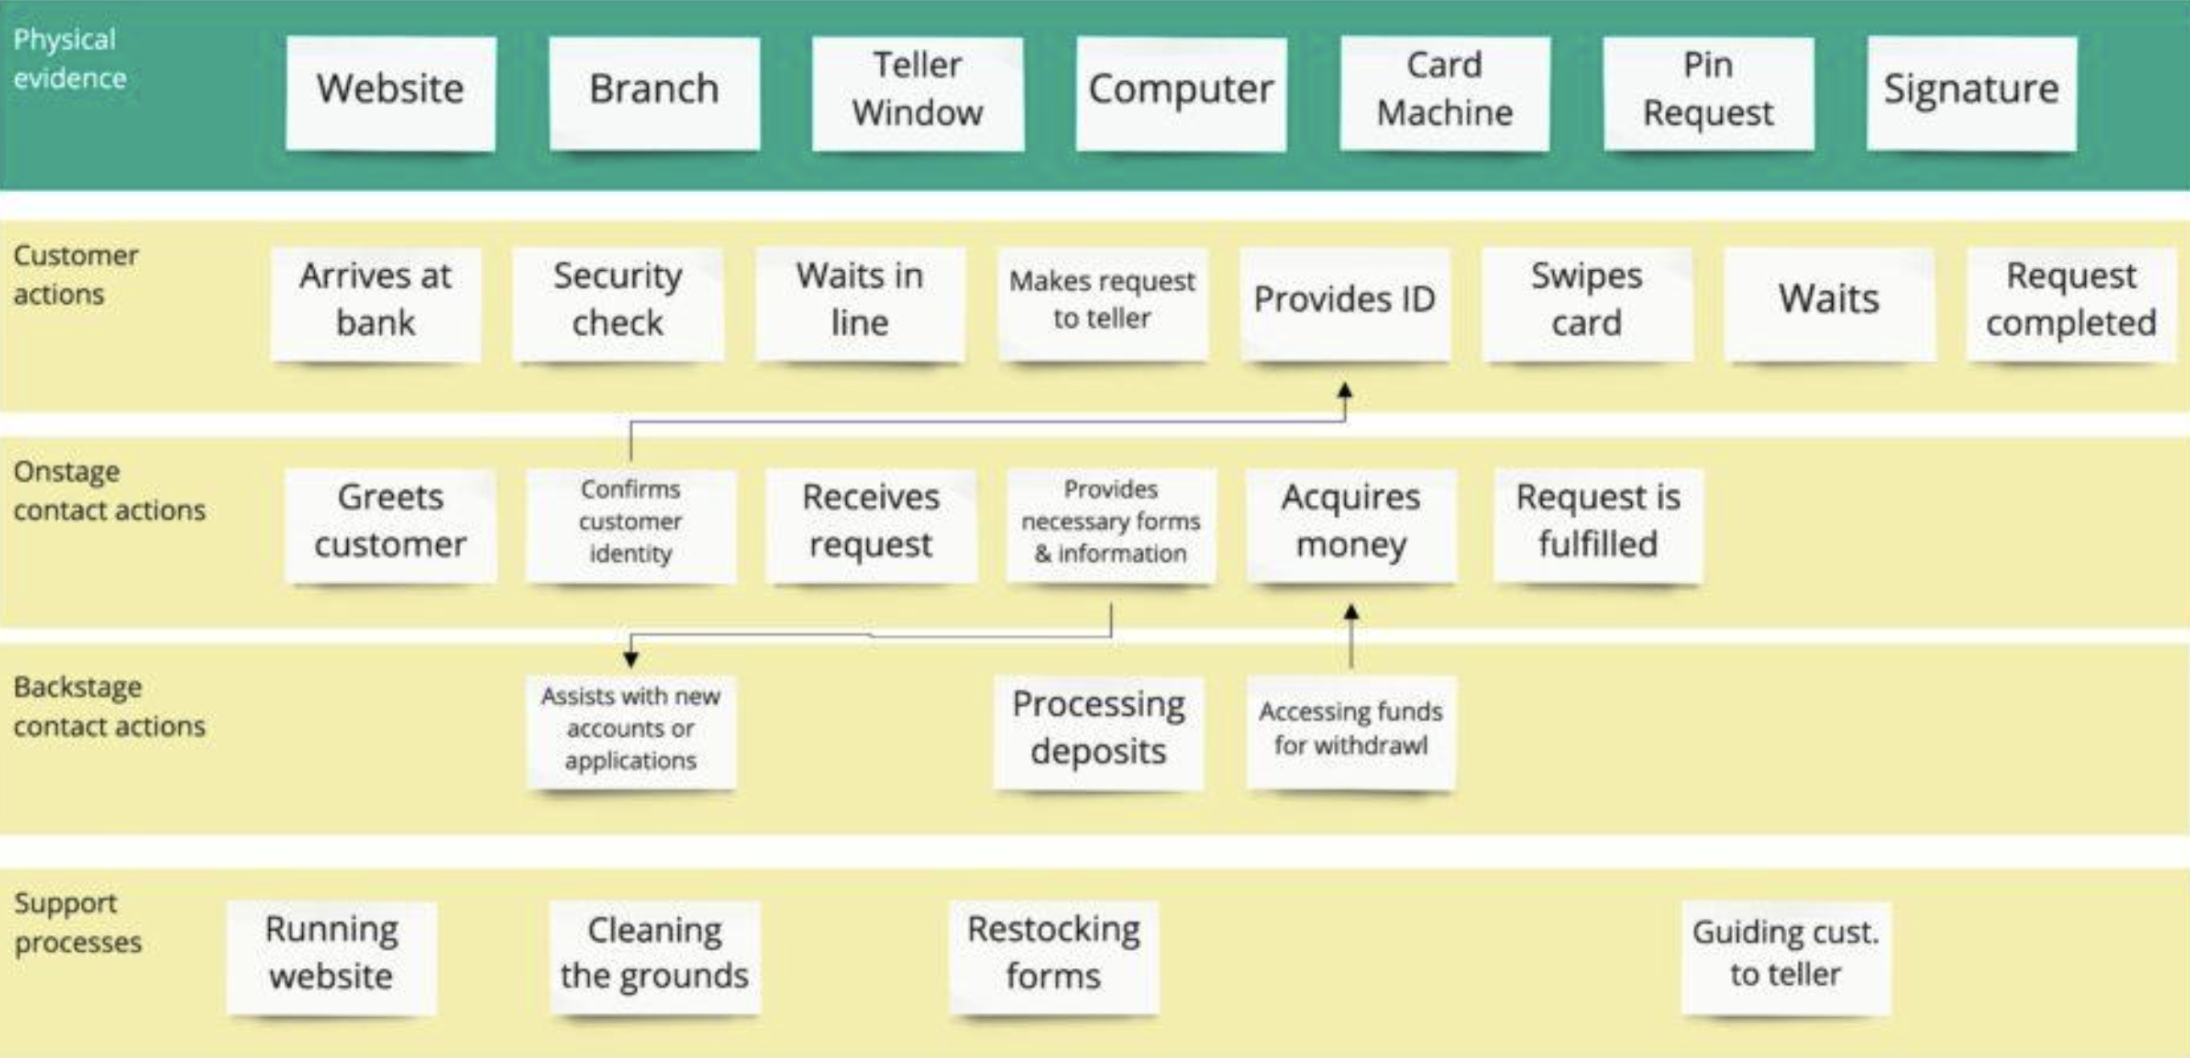 Example of a service blueprint customer journey map created in Miro that a bank might use. The image shows stages like customer actions, onstage contact actions, backstage contact actions. 